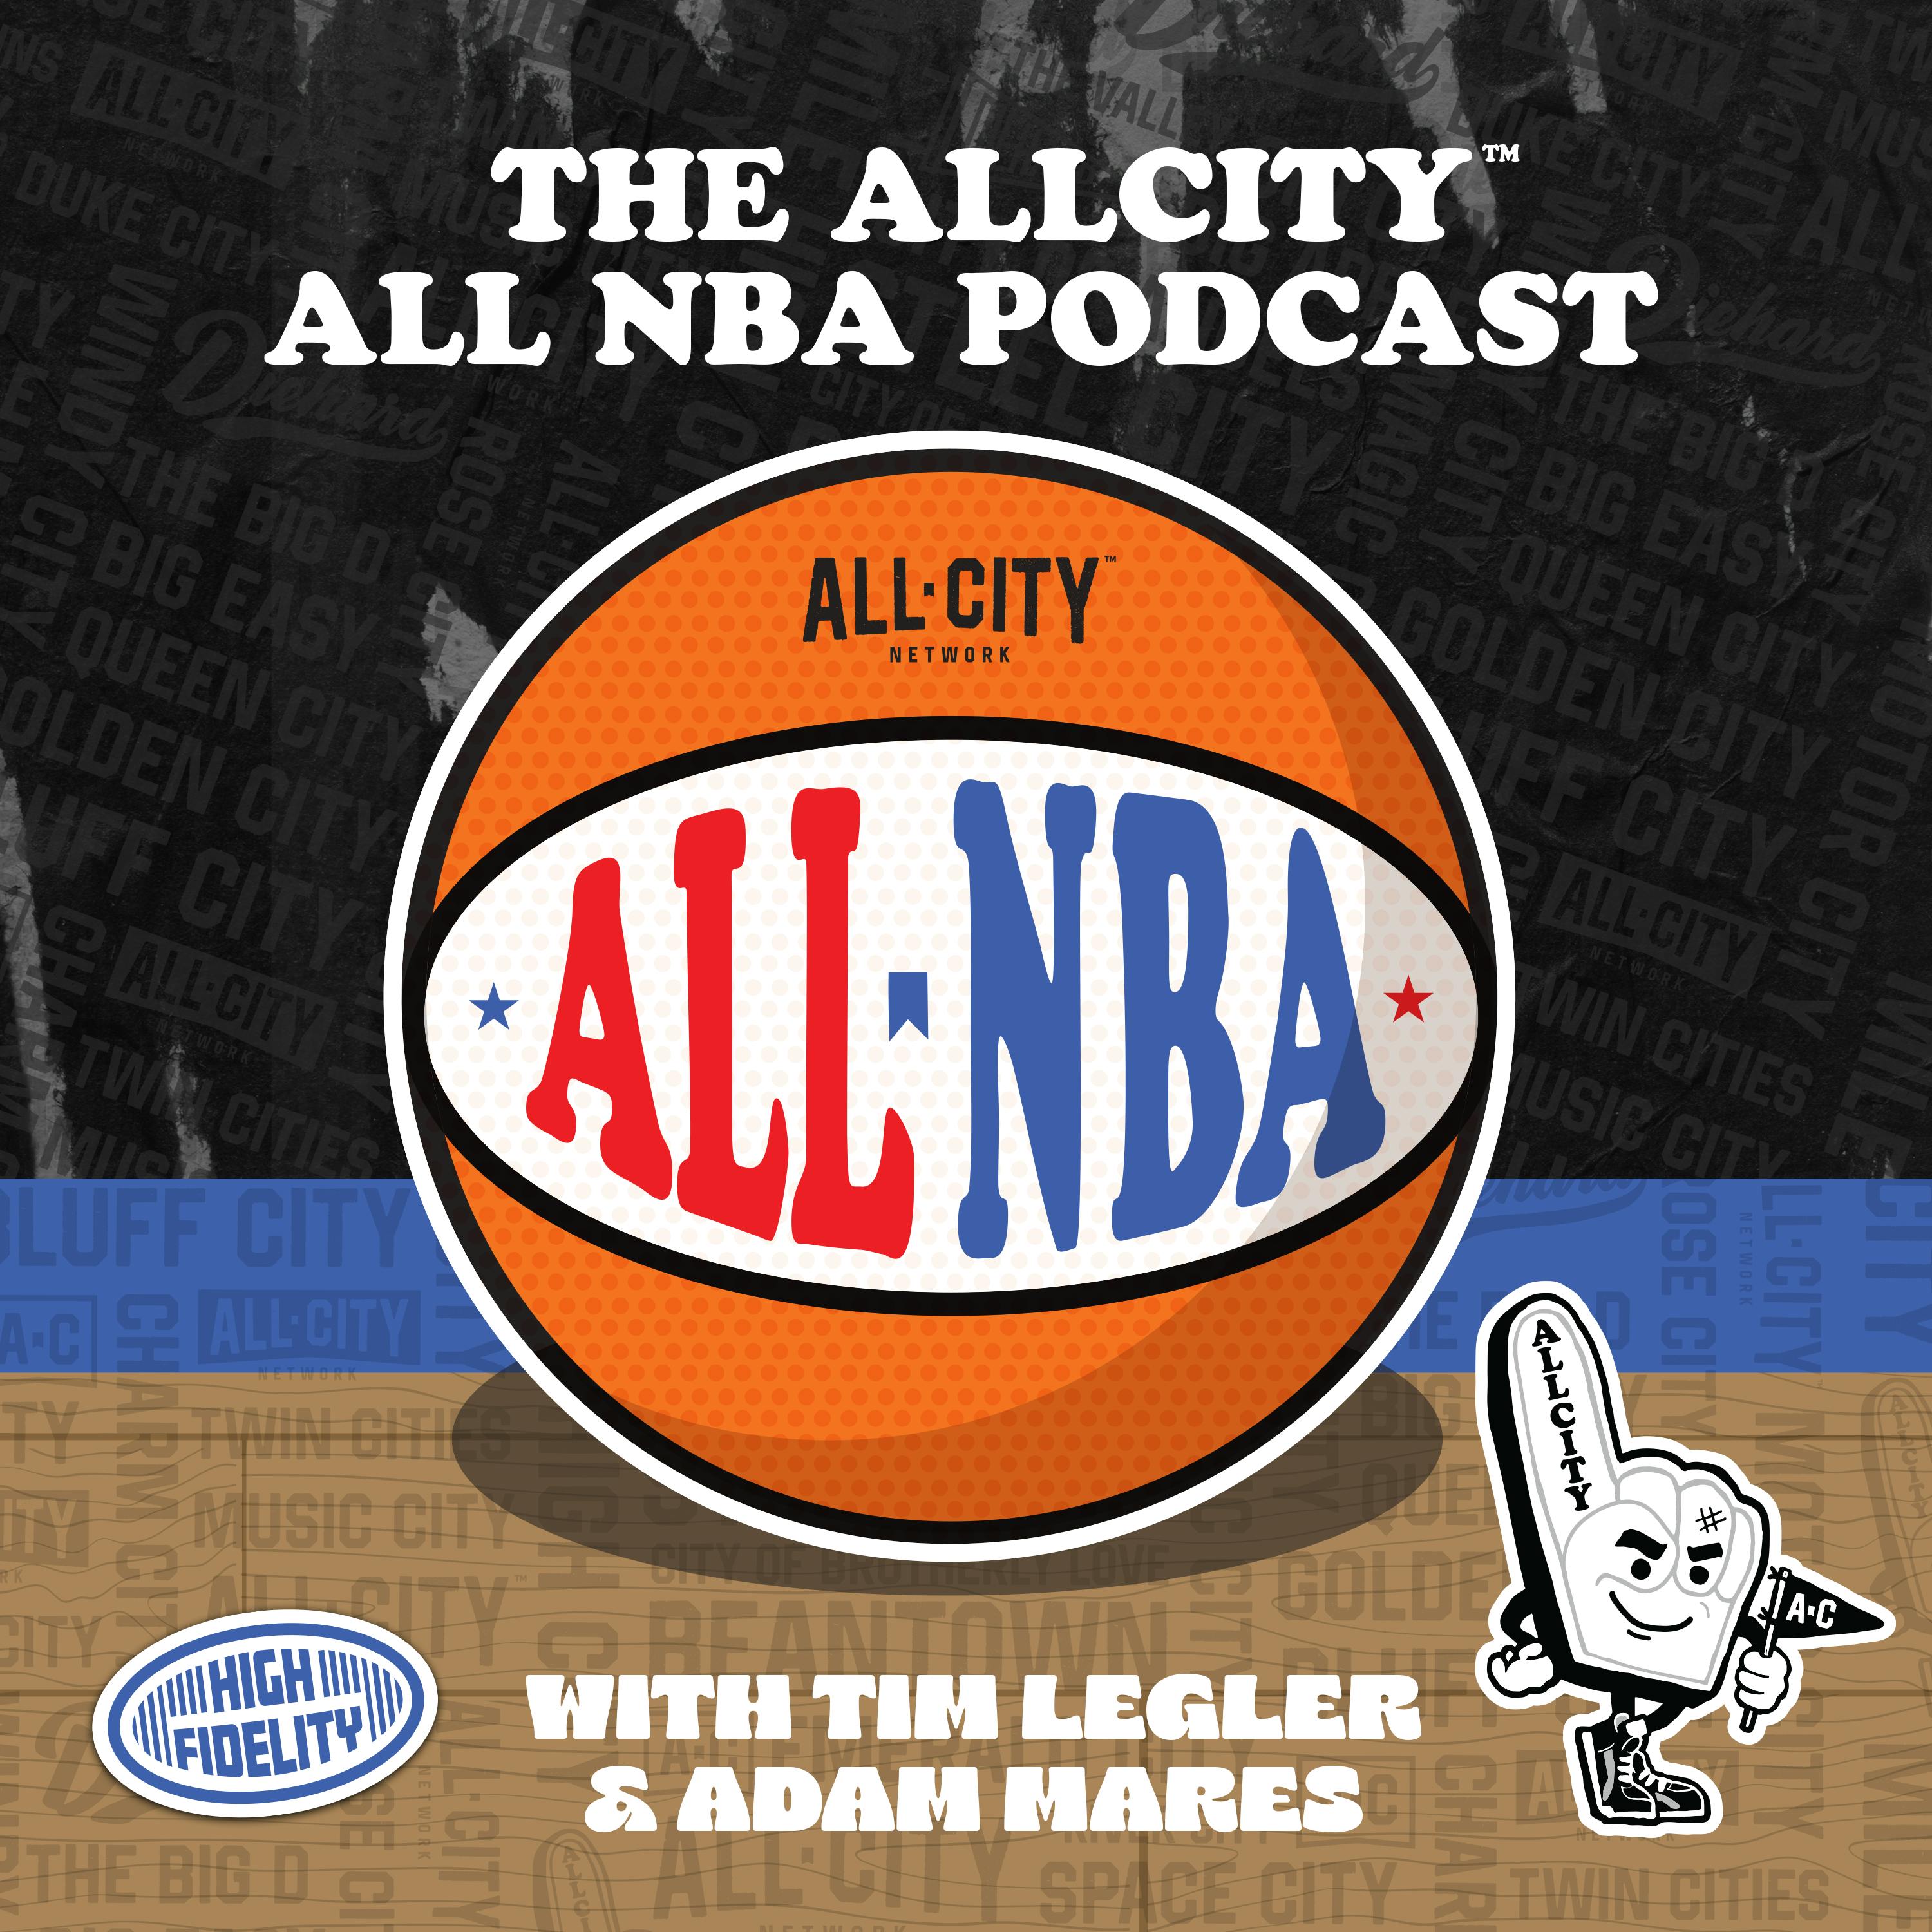 The ALL NBA Podcast: What the Lakers’ 21-point comeback win says about LeBron, the Clippers